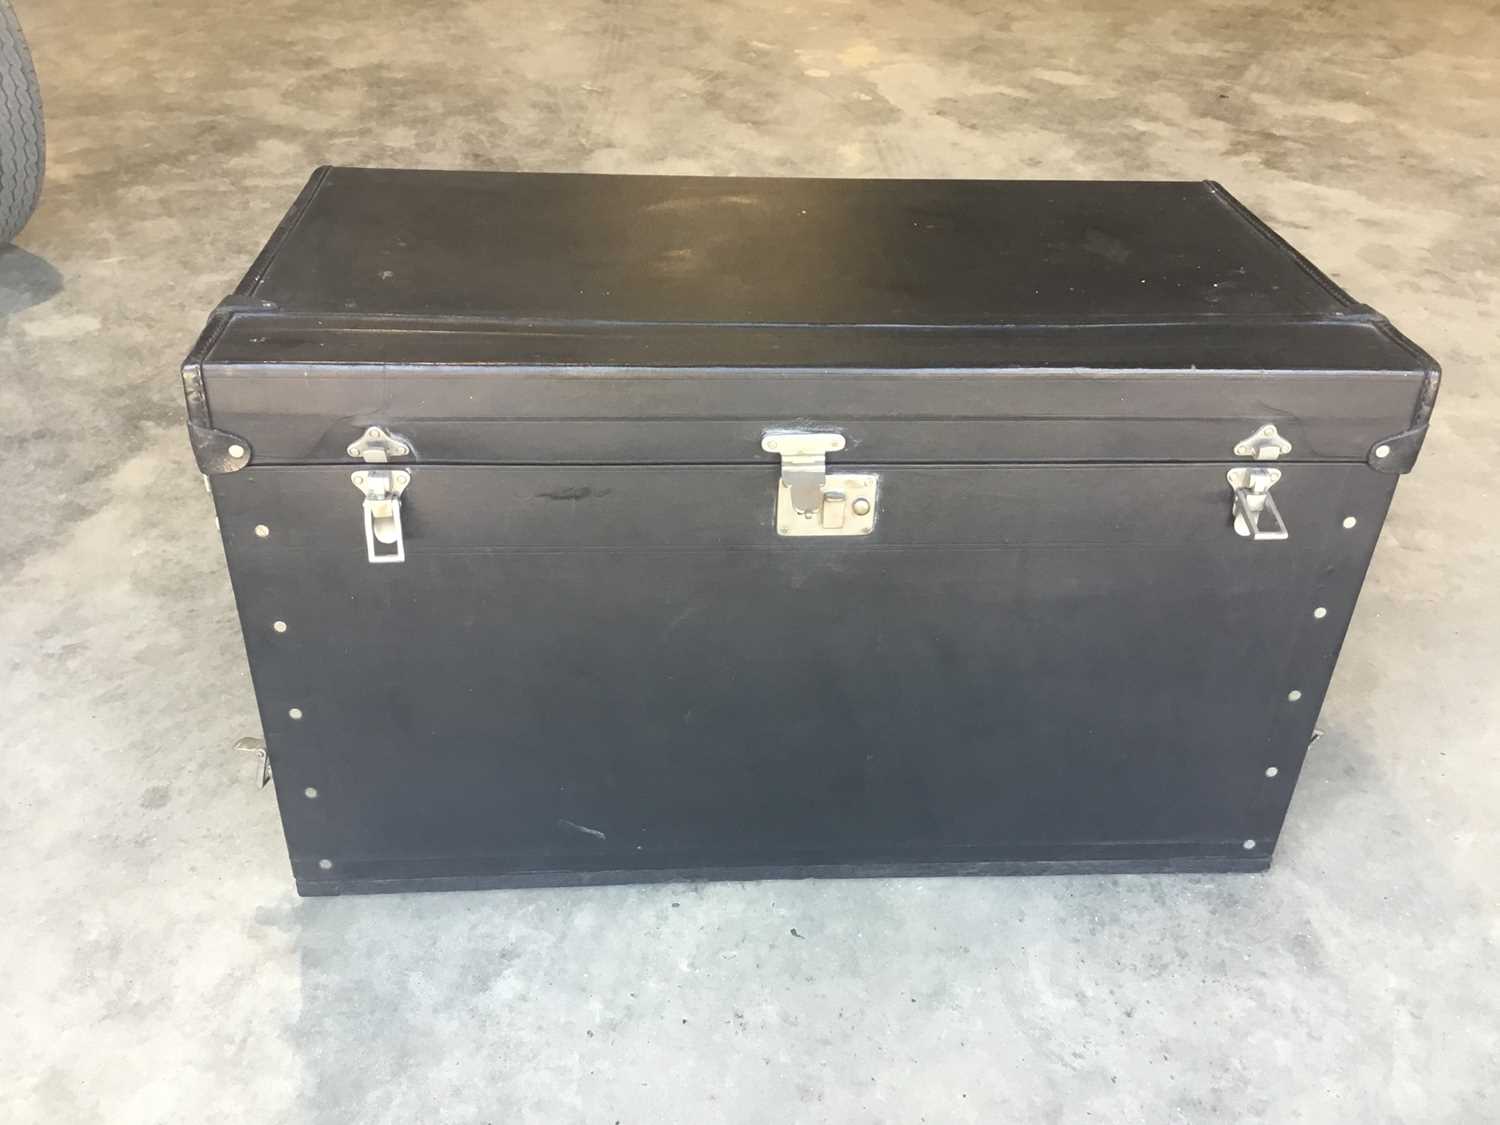 Lot 32 - Good quality vintage car trunk by Brooks